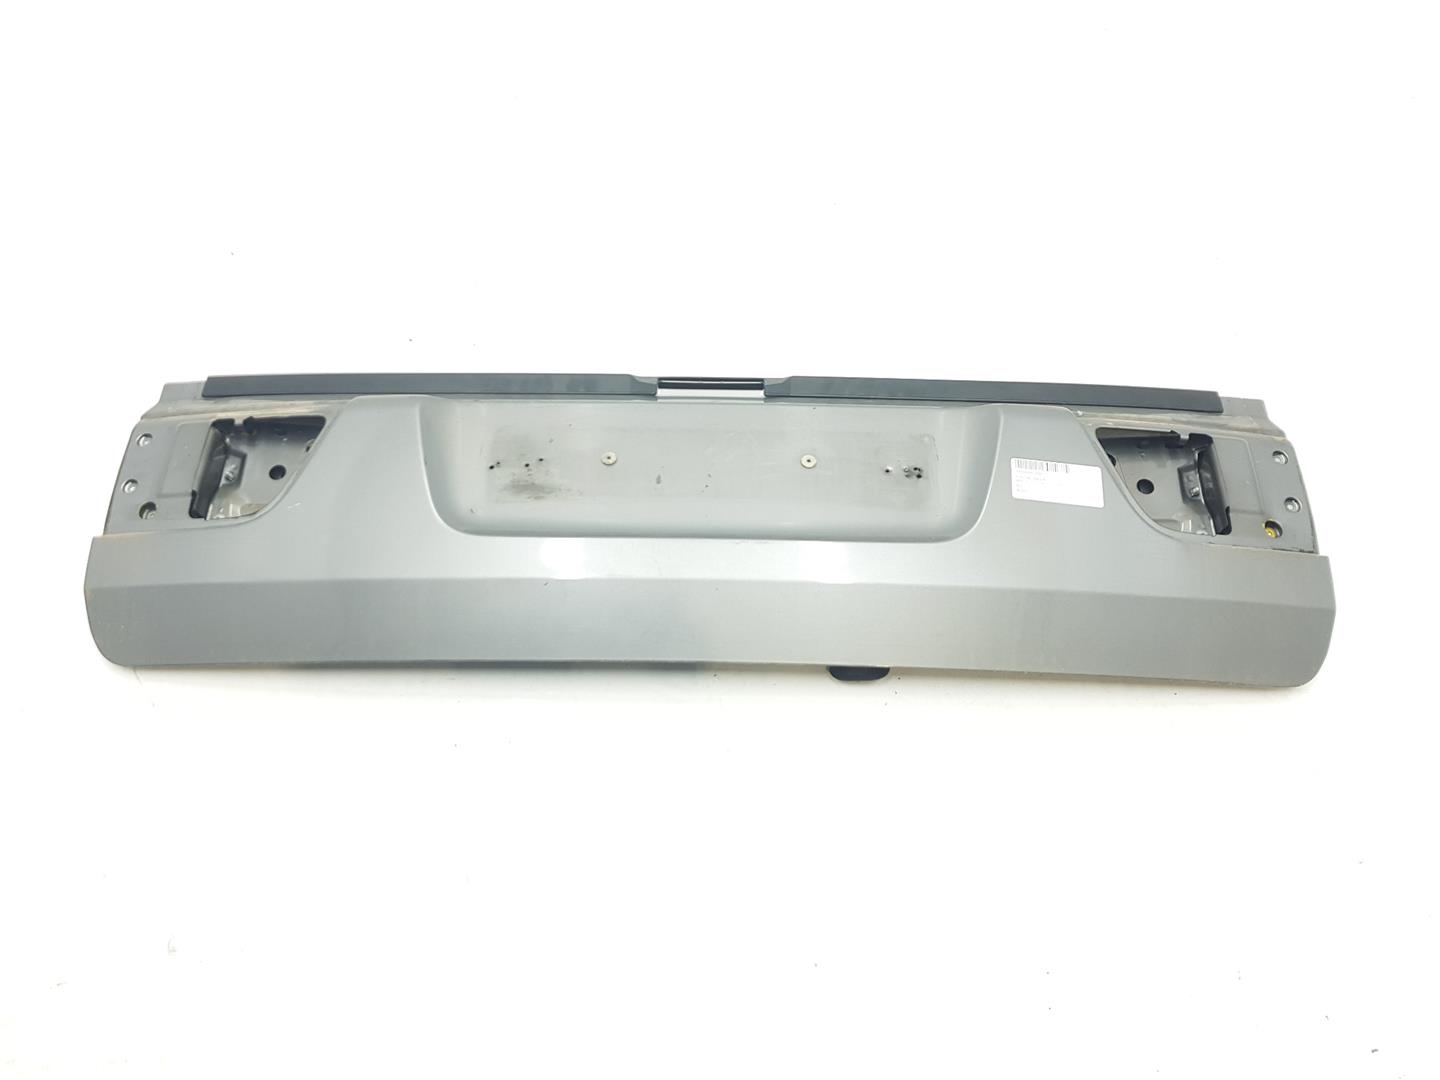 BMW X5 E53 (1999-2006) Bootlid Rear Boot 41627130827, 41627130827, COLORGRIS472 19850317